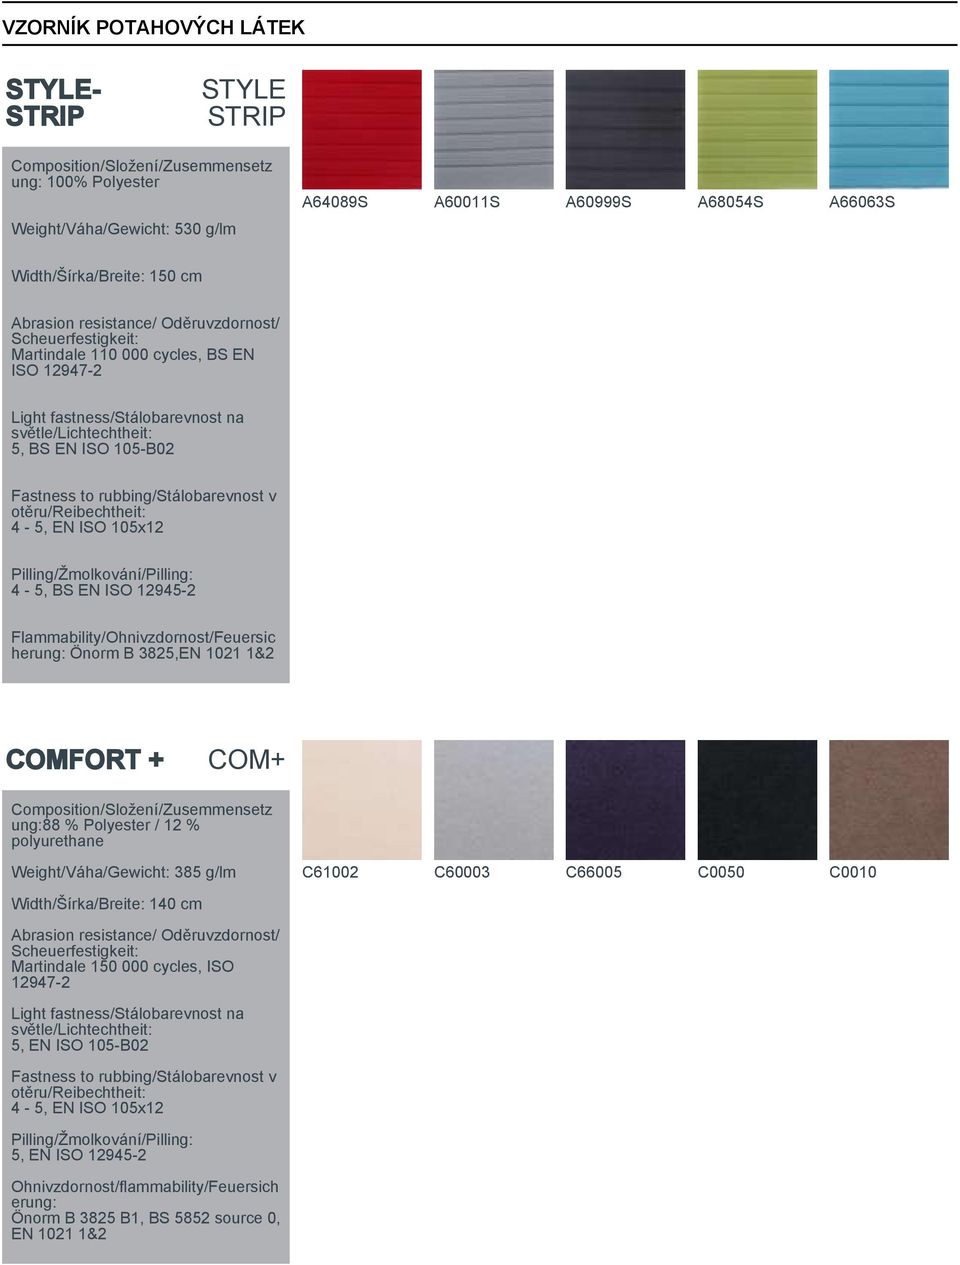 COM+ ung:88 % Polyester / 12 % polyurethane Weight/Váha/Gewicht: 385 g/lm C61002 C60003 C66005 C0050 C0010 Martindale 150 000 cycles, ISO